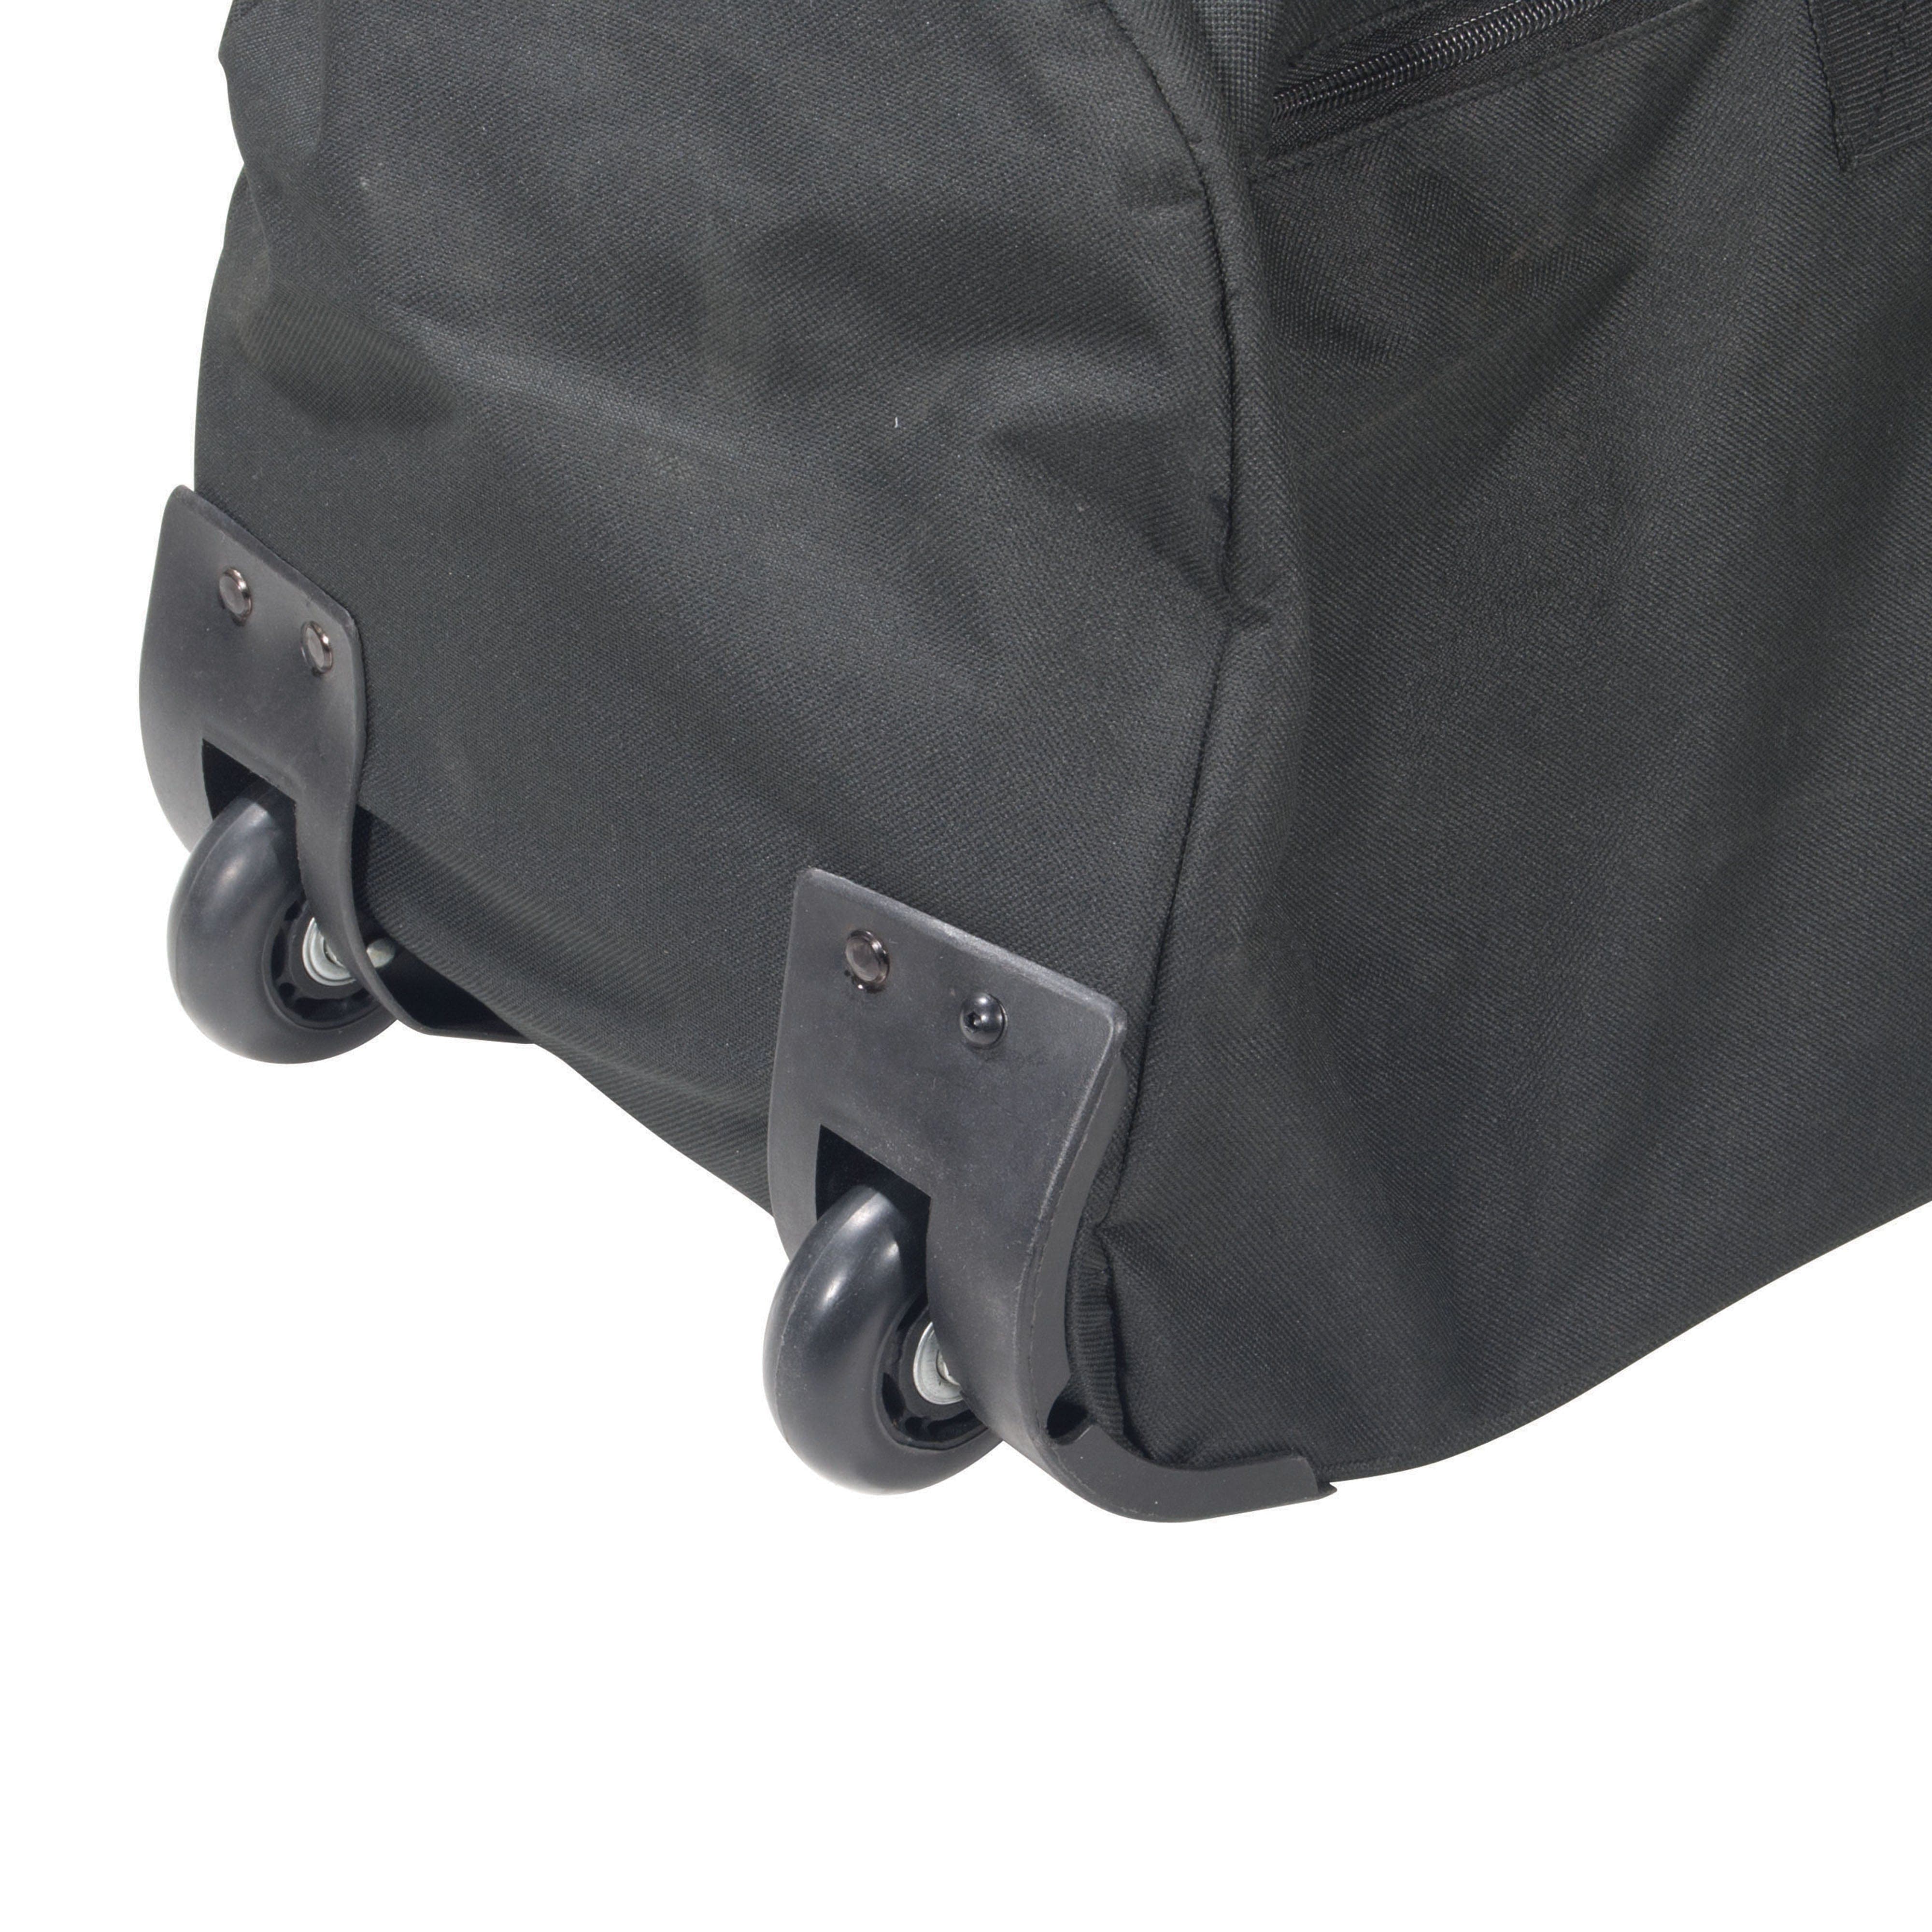 Drive Medical Transport Chairs Drive Medical Travelite Transport Wheelchair Chair in a Bag